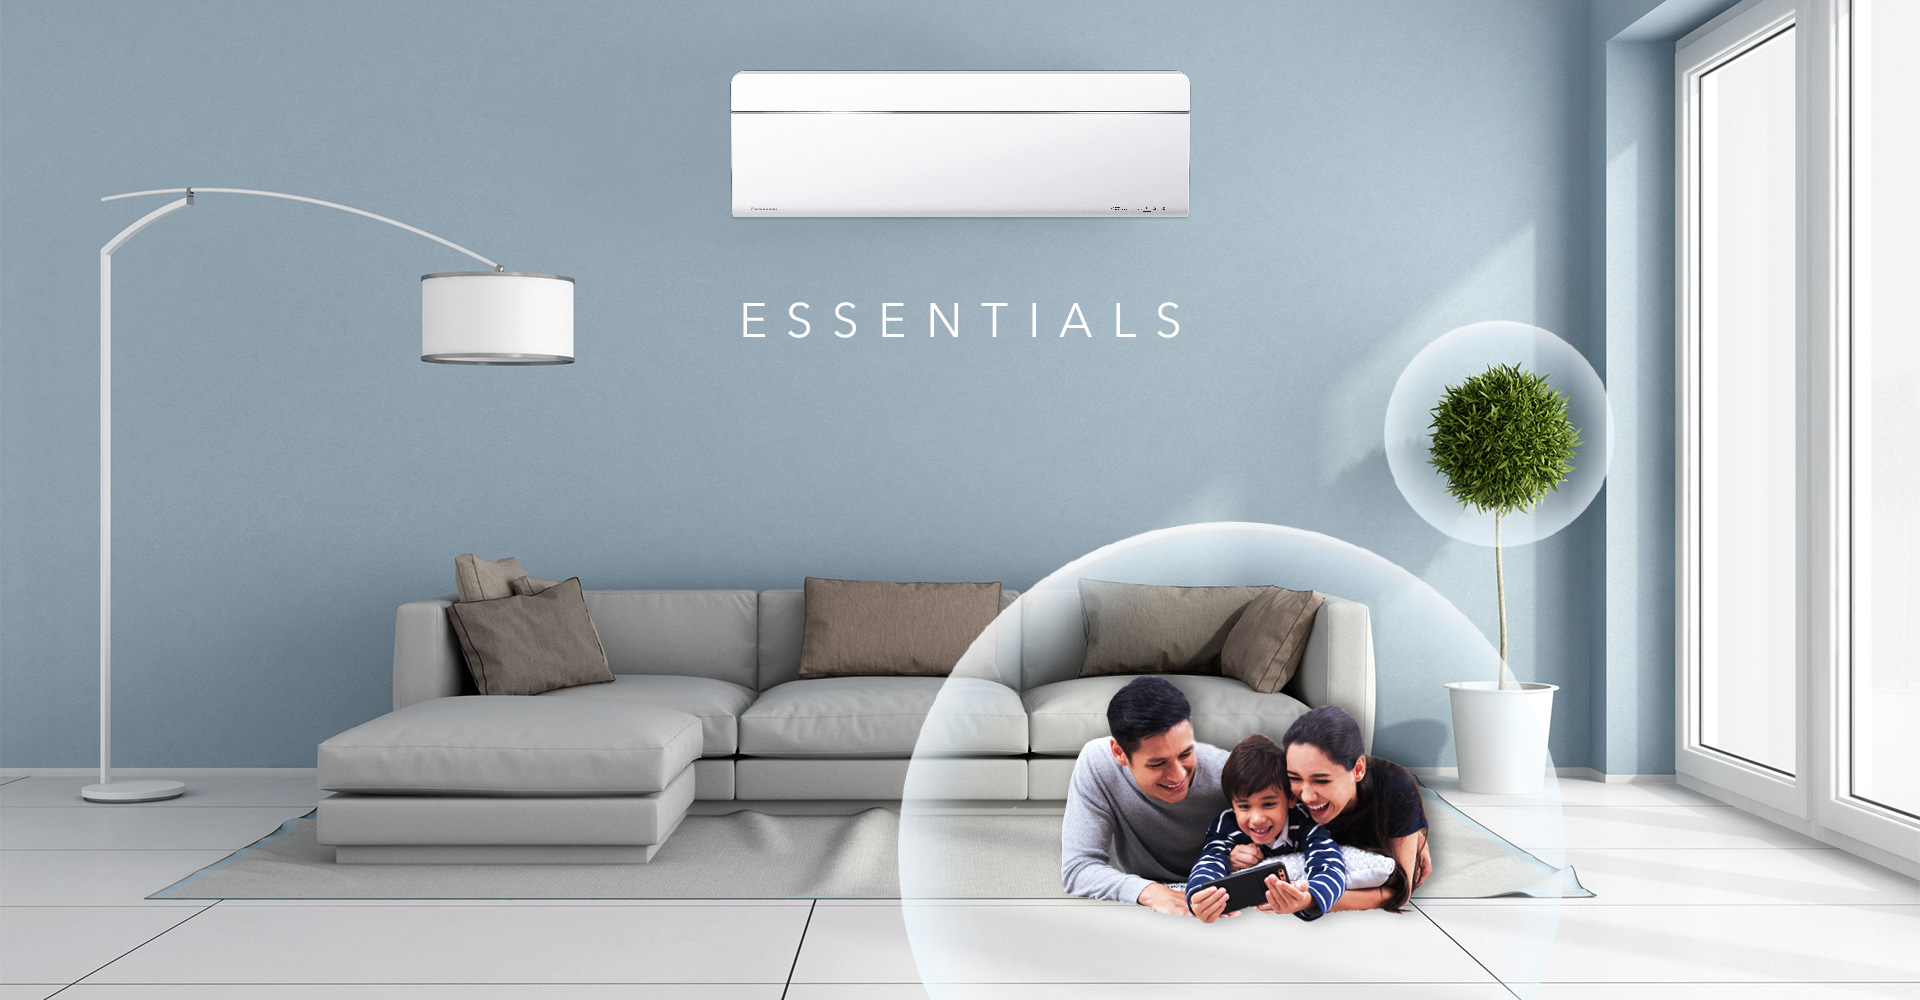 5 New Air Conditioning Technologies to Keep You Cool